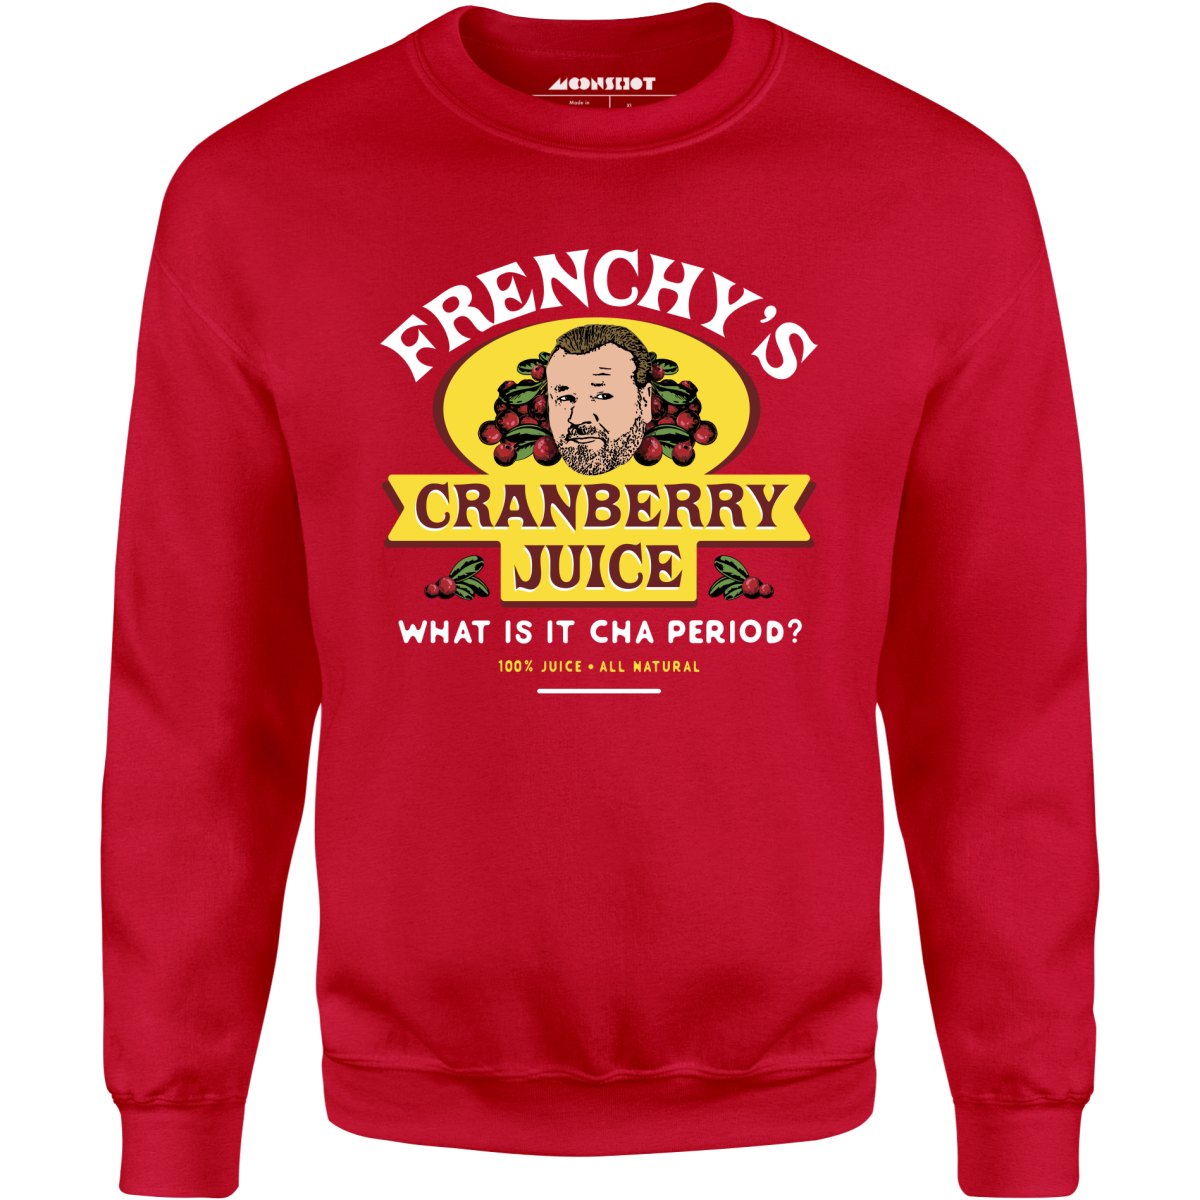 Frenchy's Cranberry Juice - The Departed - Unisex Sweatshirt